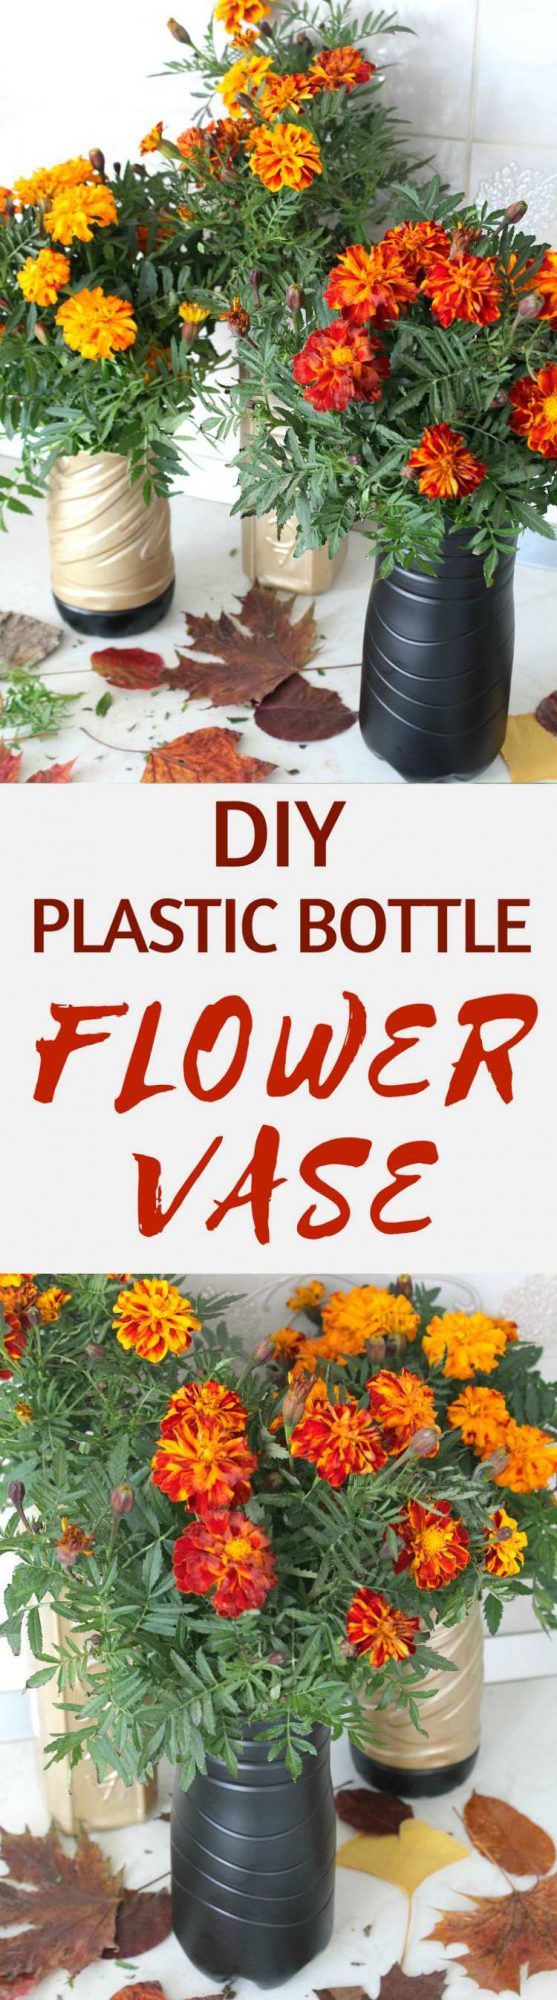 This DIY flower vase is an easy, super quick and inexpensive project and looks great filled with pretty, colorful flowers!